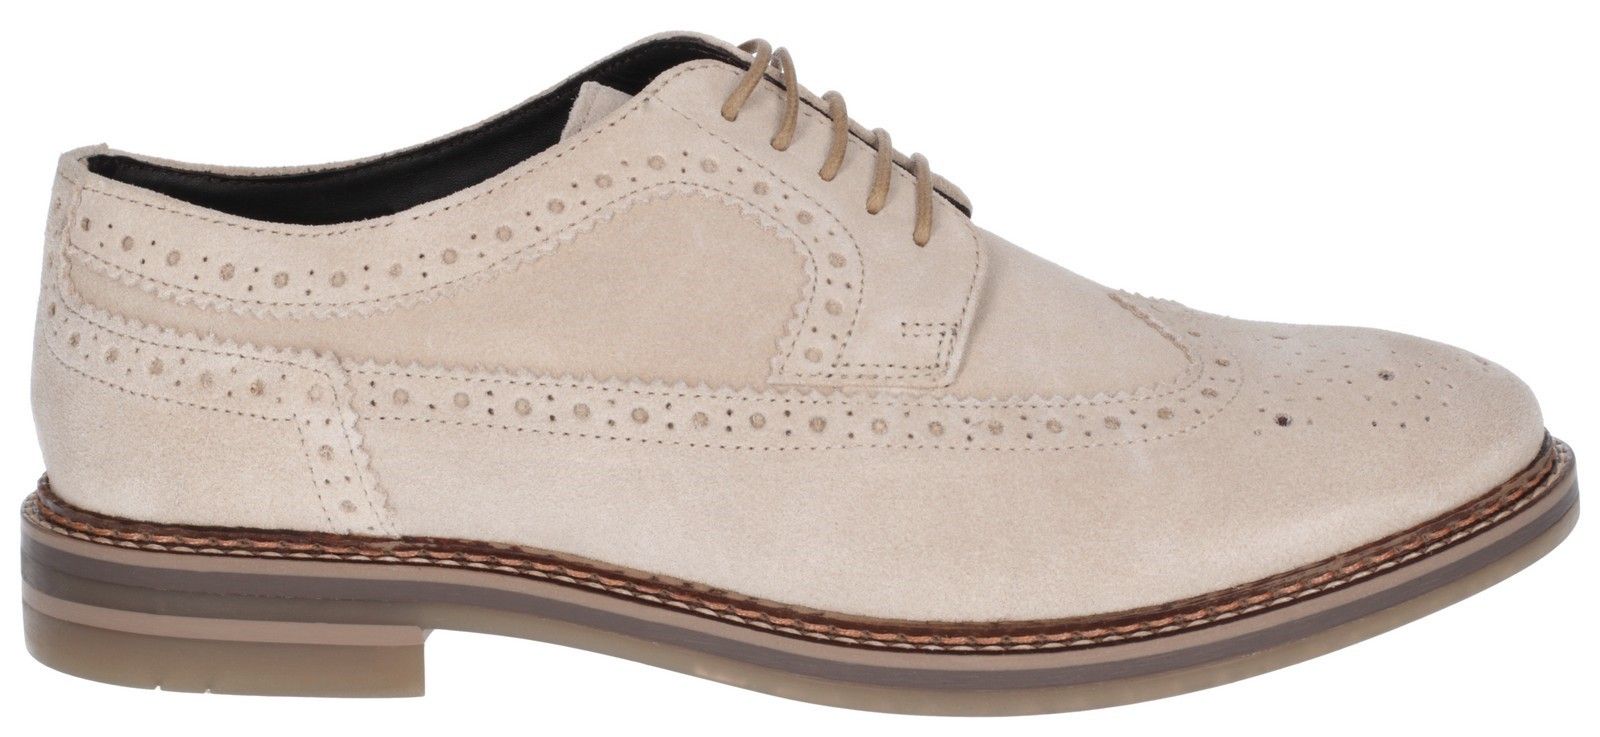 Turner is one of our classic brogues from the Artist range and has been one of the brand's most loved styles of recent seasons. This long wing with a contemporary twist features decorative toe detailing and a traditional wing tip toe cap. High quality suede leather. 
High quality leather lining.